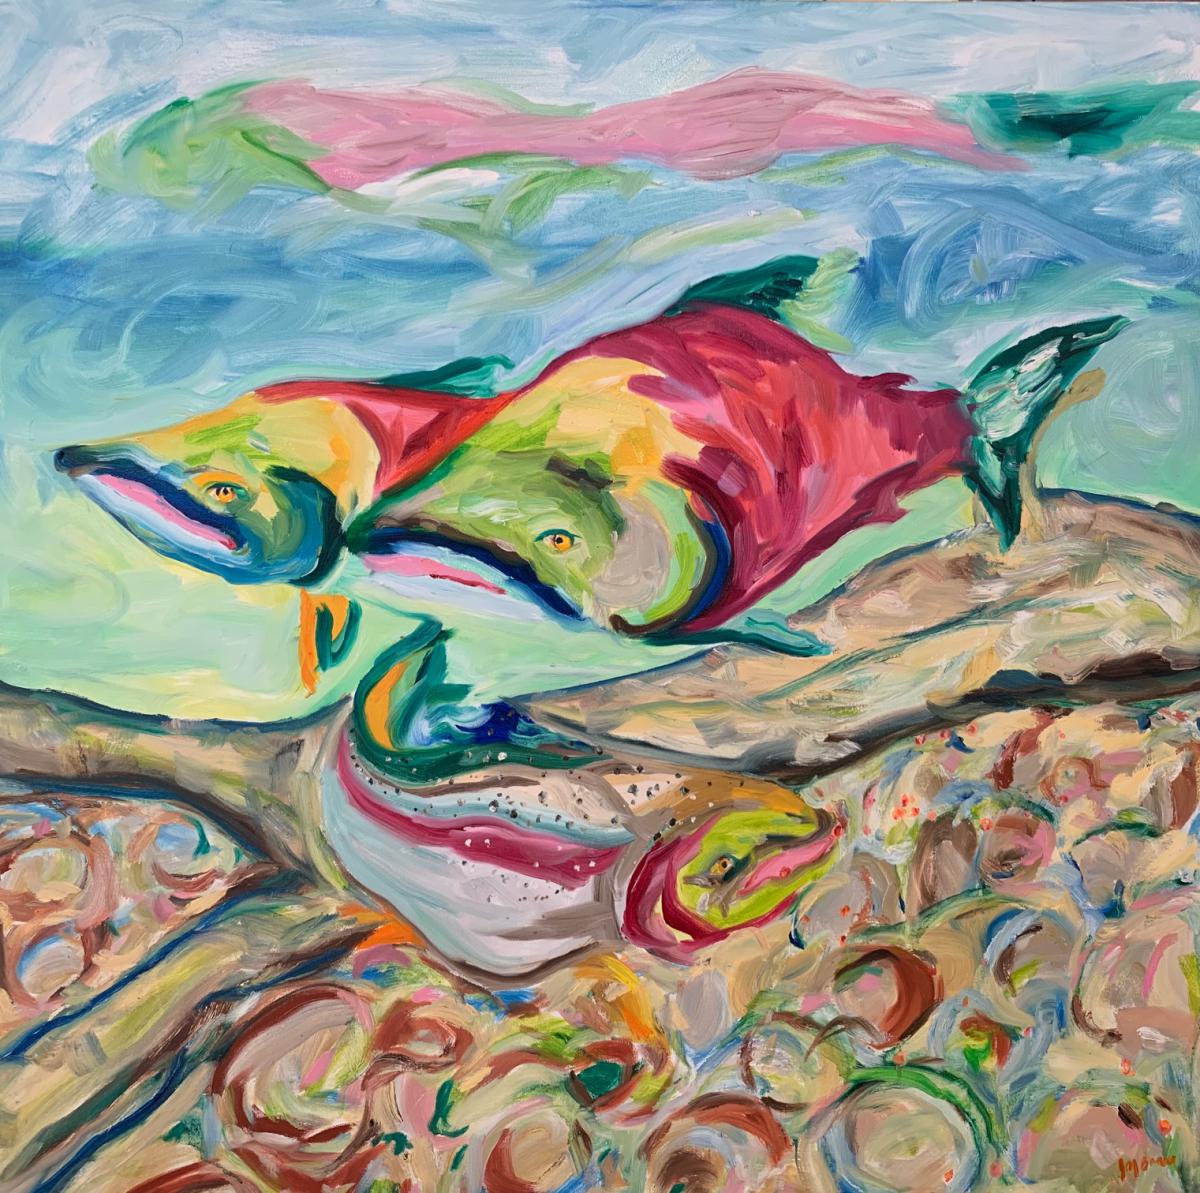 Sockeye with Trout - Perseverance 60x60 $2000